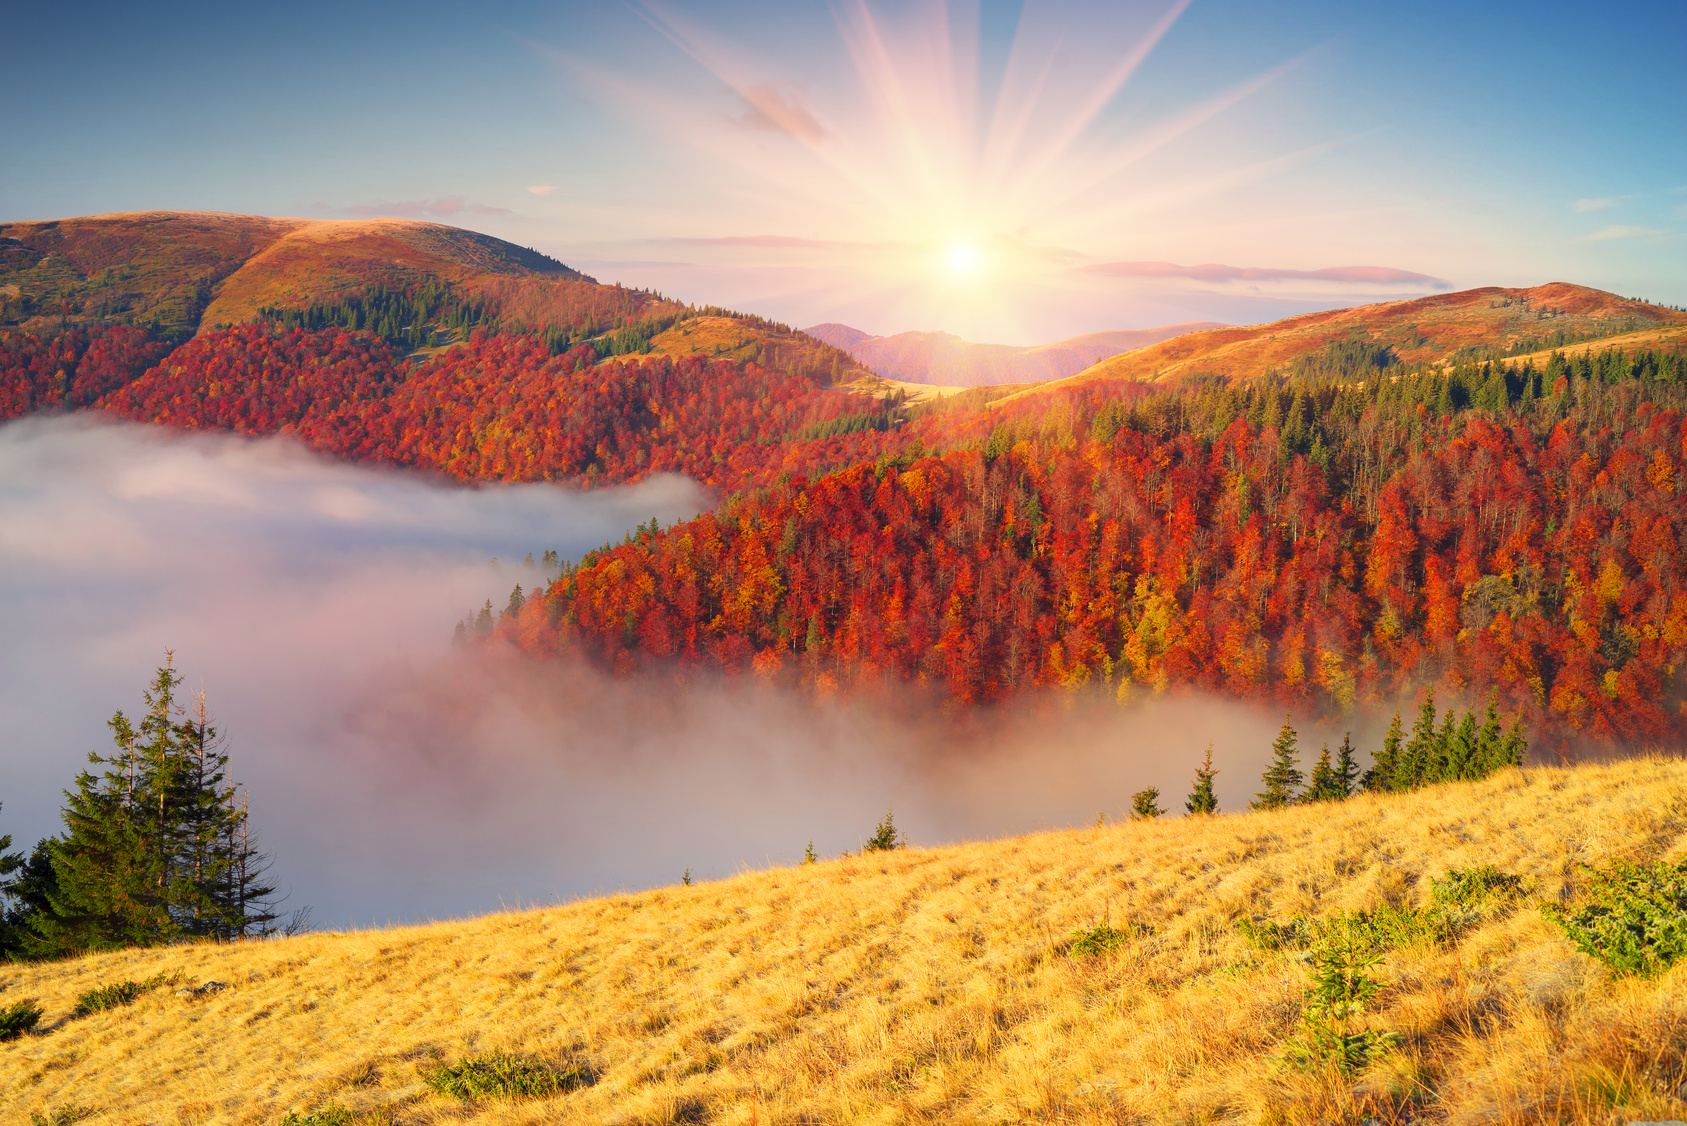 The Best Places To See Stunning Fall Colors In The U.S.